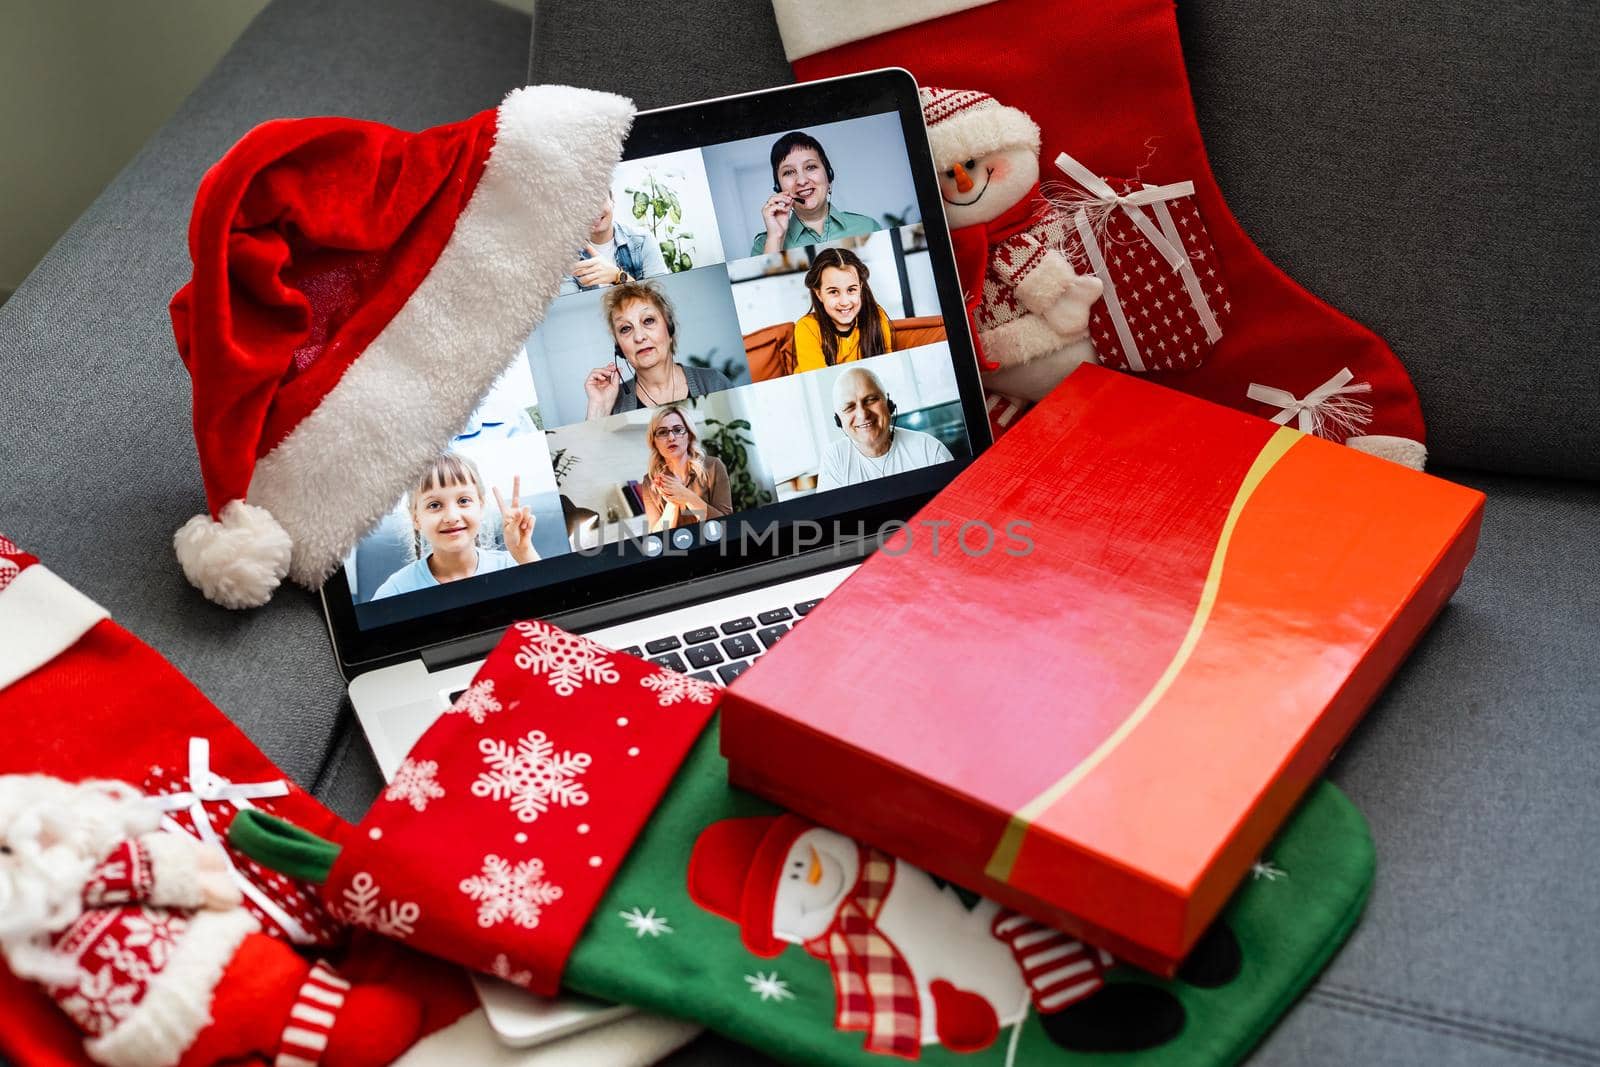 Family online video conference, christmas greetings. Virtual call through screen of laptop, gift. Remote conversation with mom, wife, children. Home isolation.